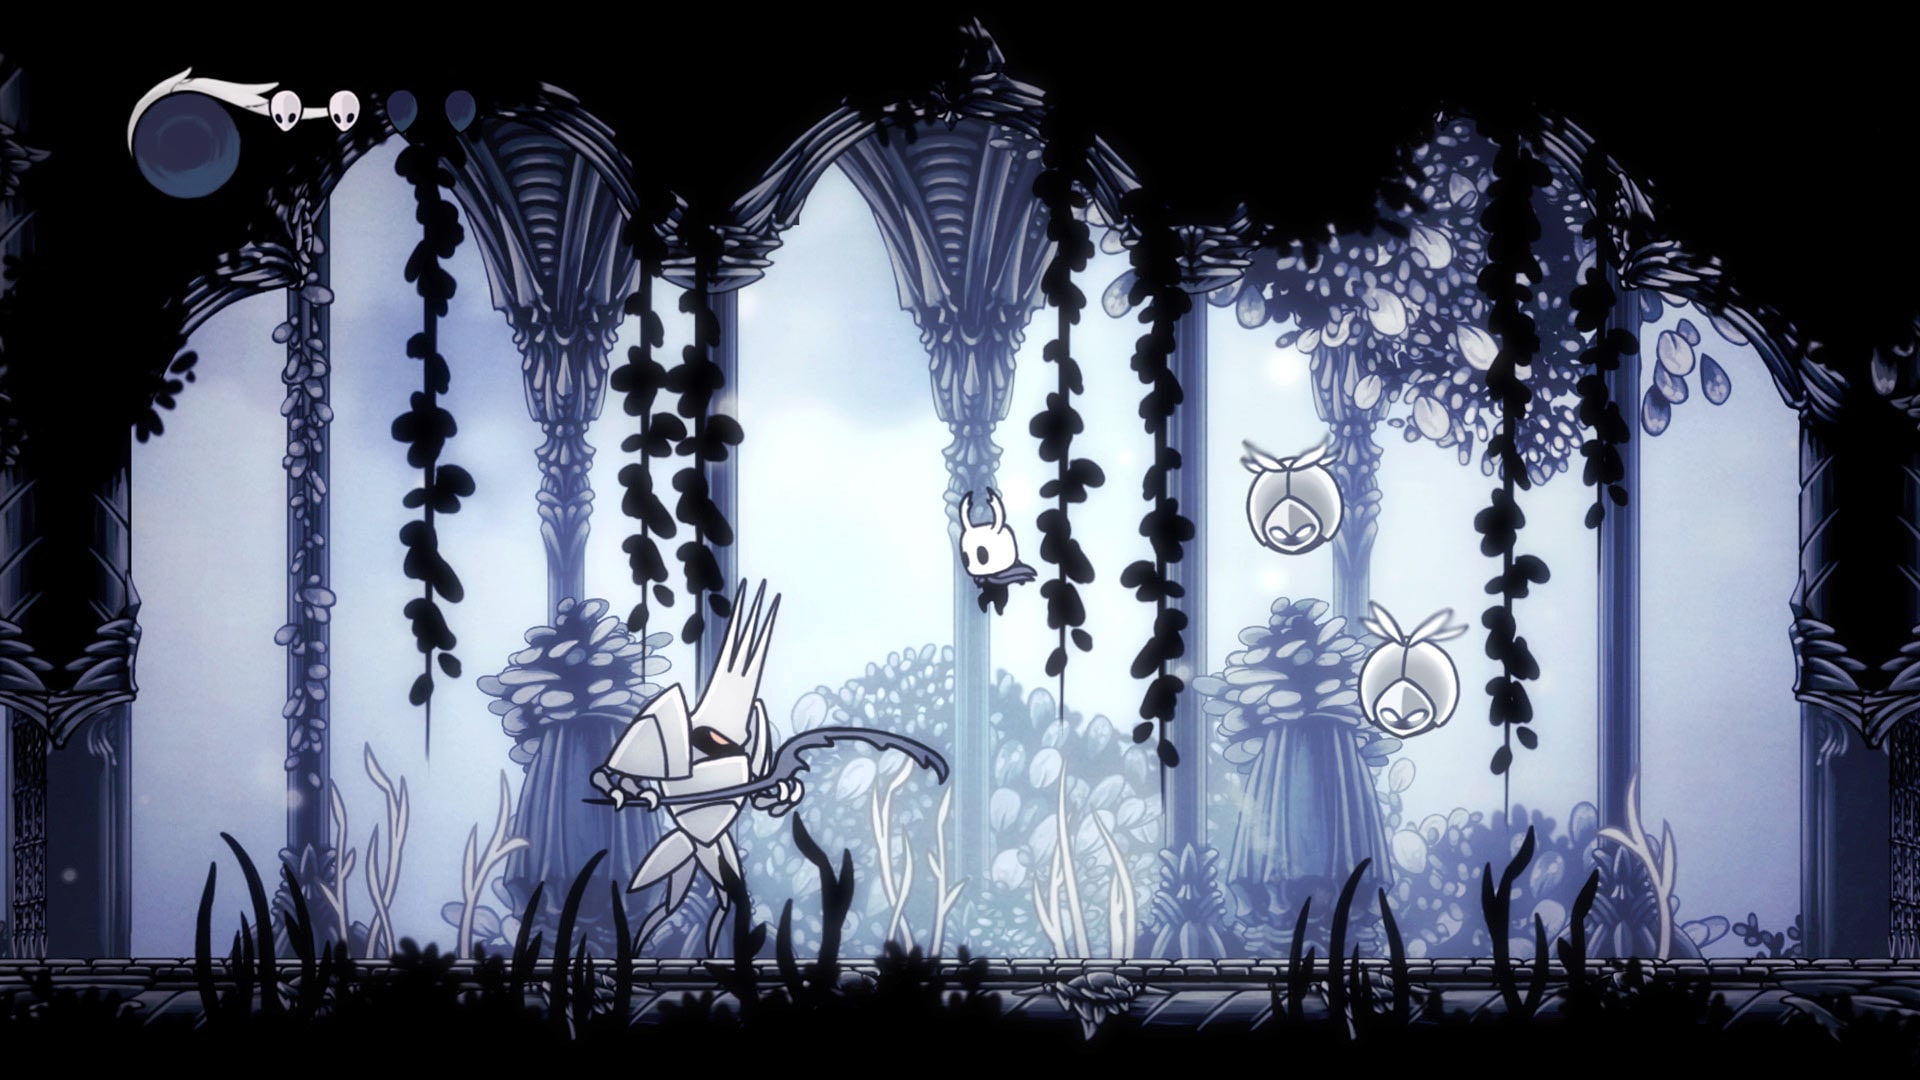  Hollow Knight (PS4) : Video Games